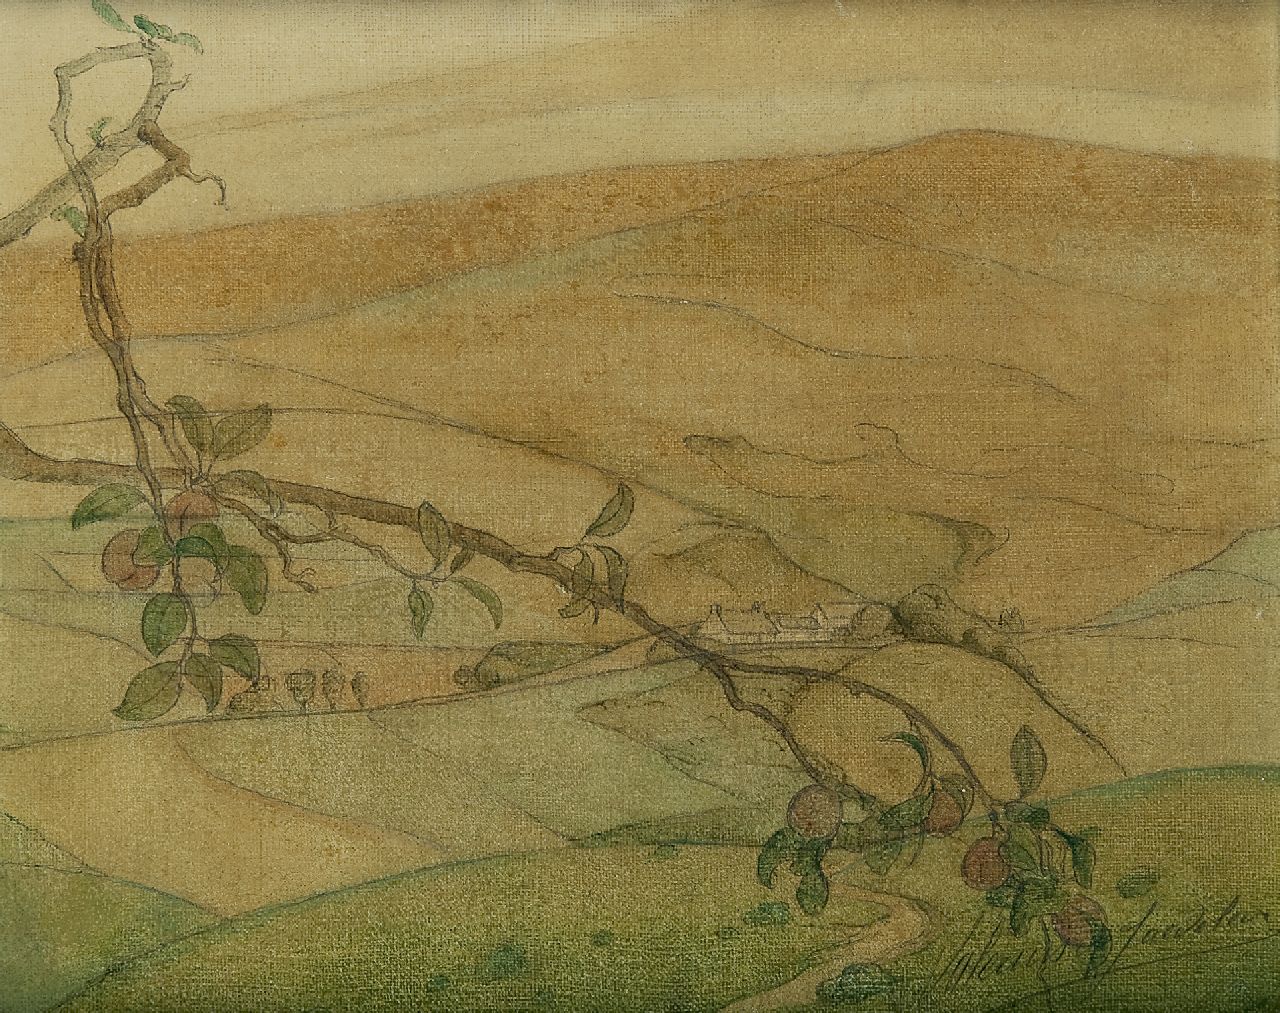 Saedeleer V. de | Valerius de Saedeleer, A Valley in Wales, oil on canvas 23.2 x 28.3 cm, signed l.r. and paInted ca. 1916